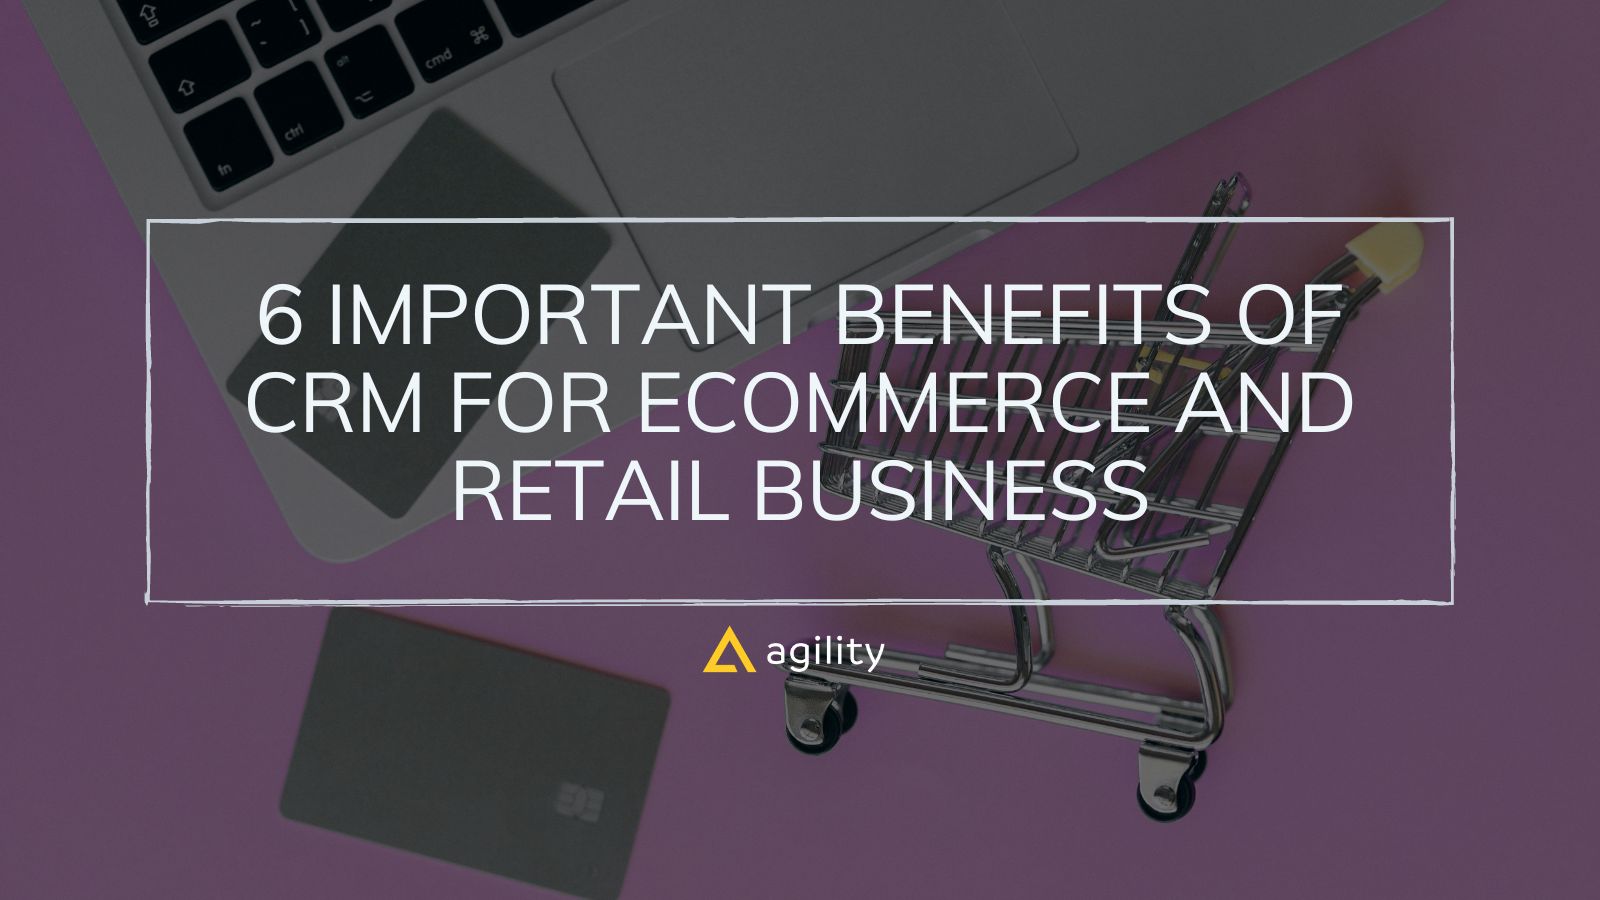 6 Important Benefits of CRM for Ecommerce and Retail Business